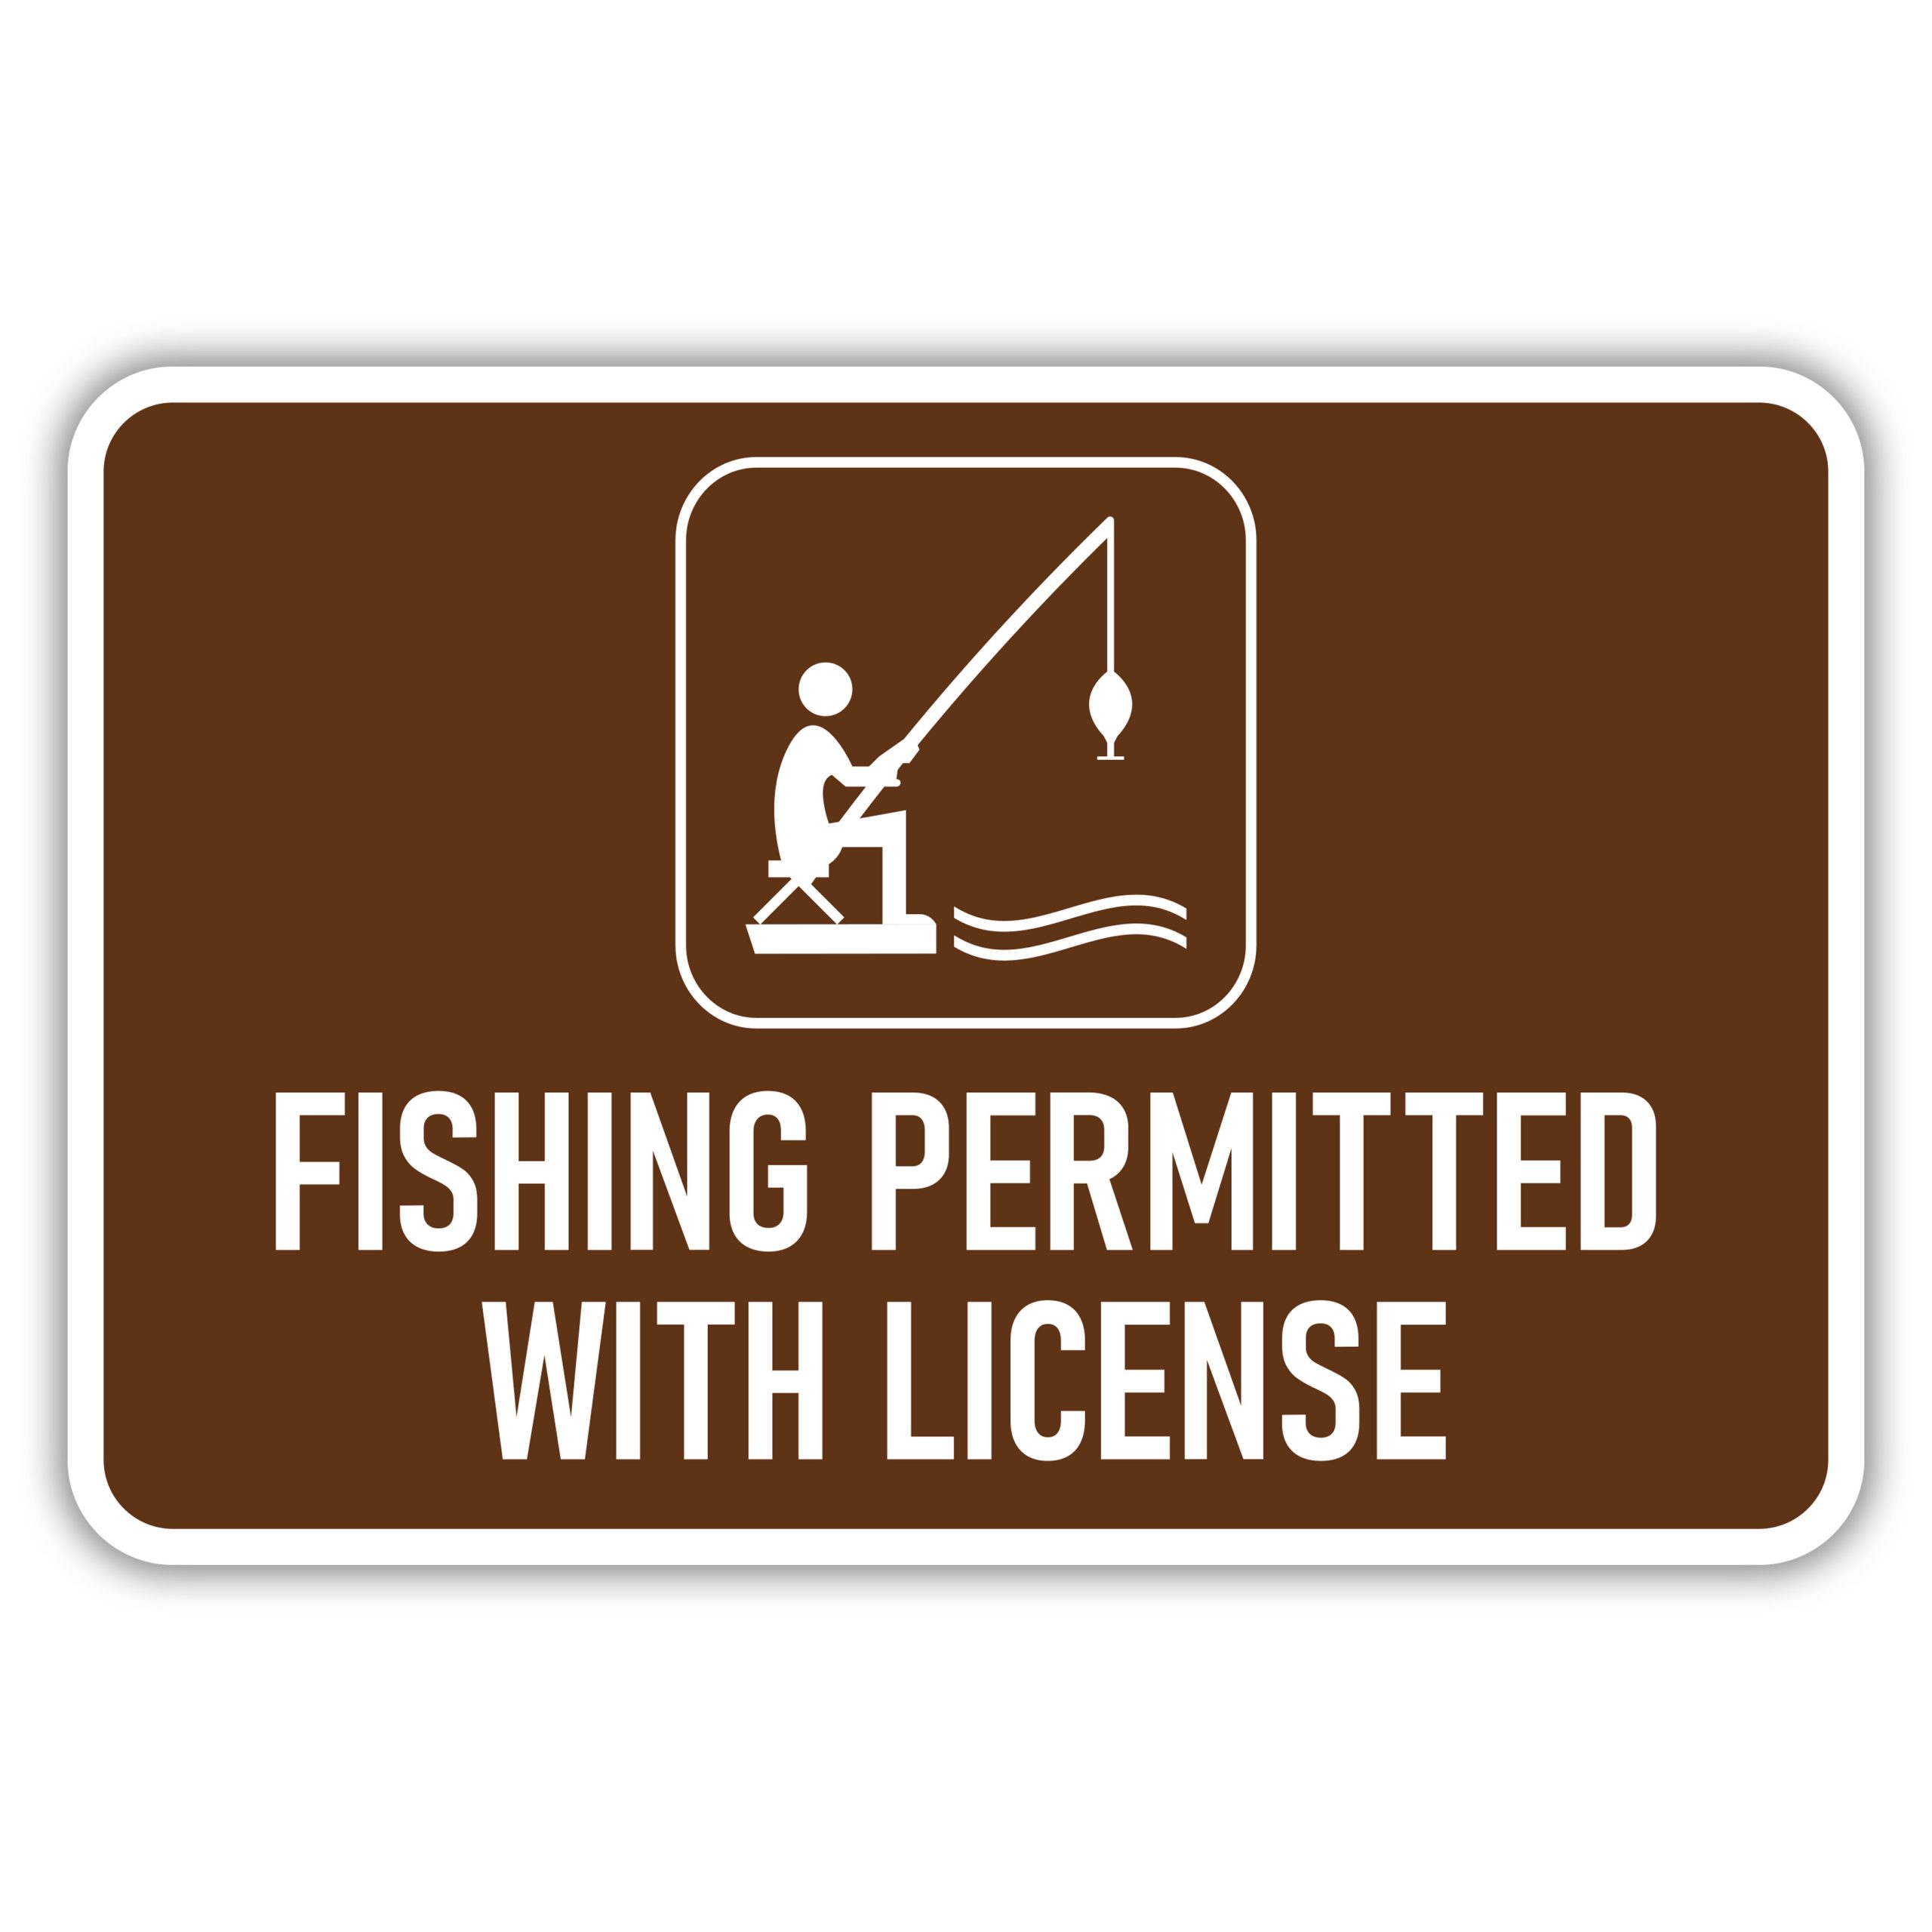 FISHING PERMITTED WITH LICENSE American Sign Company